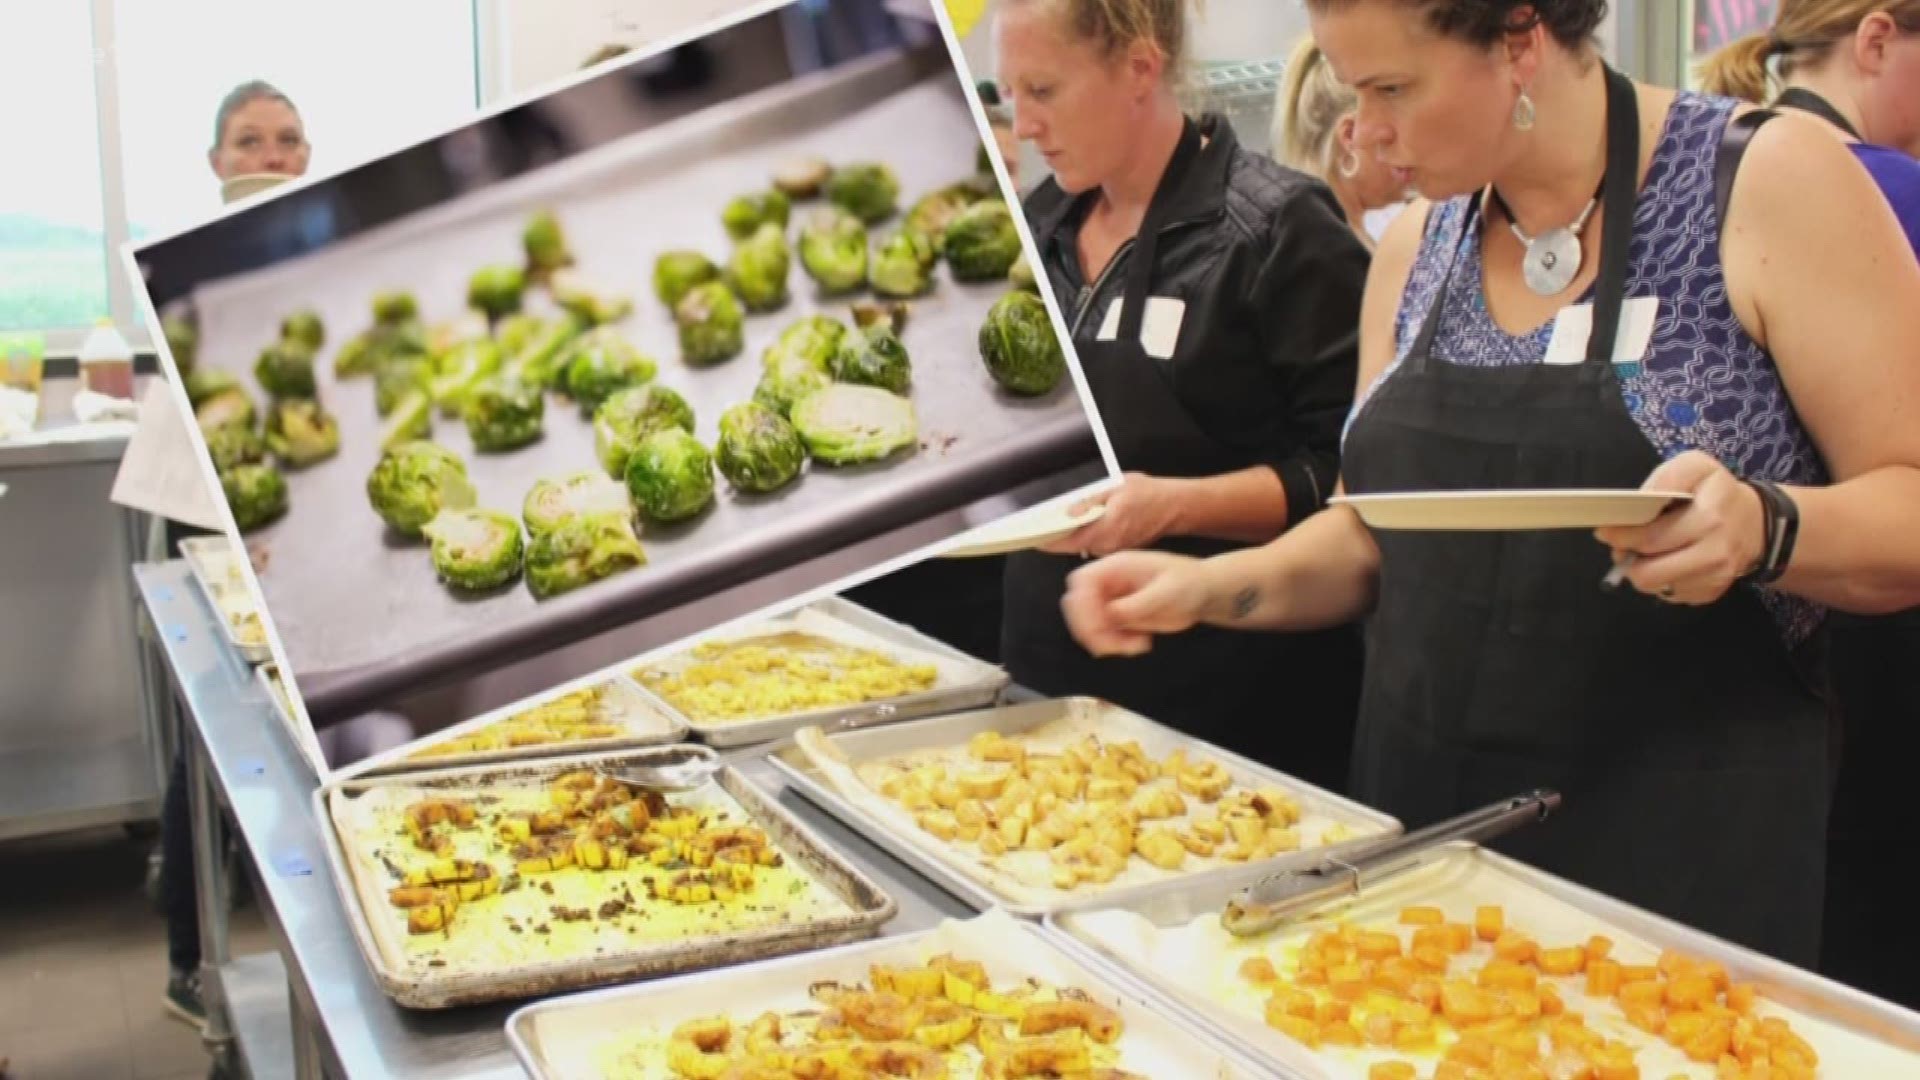 Good Acre brings healthy food into Minnesota schools with the help of local farmers. We tried some of their recipes in the KARE kitchen. Check it out!